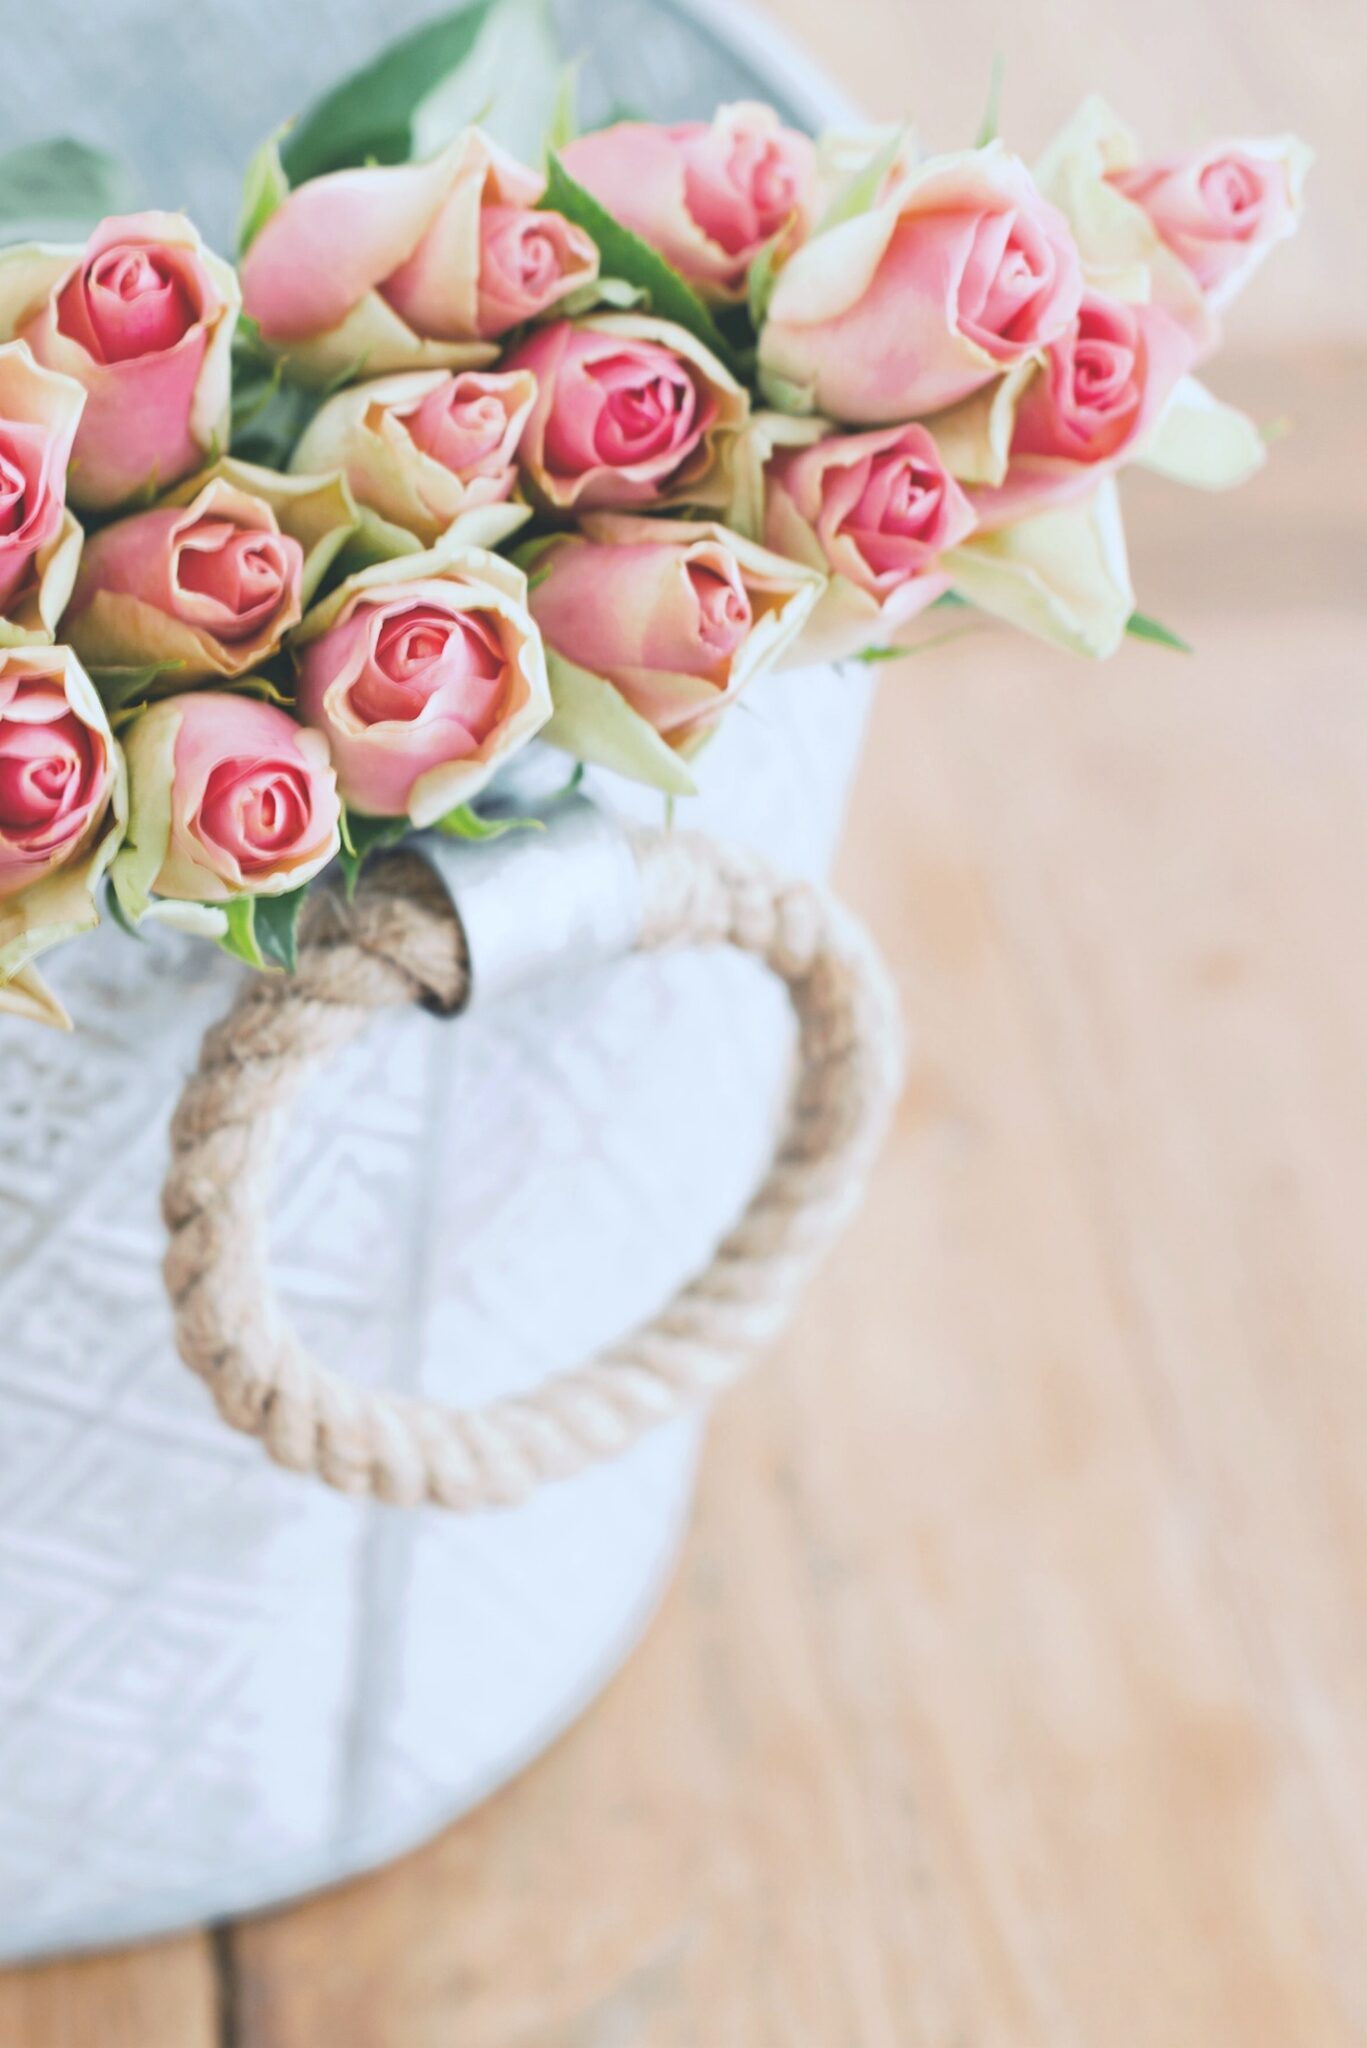 Why Flowers Are Still a Great Gift to Give